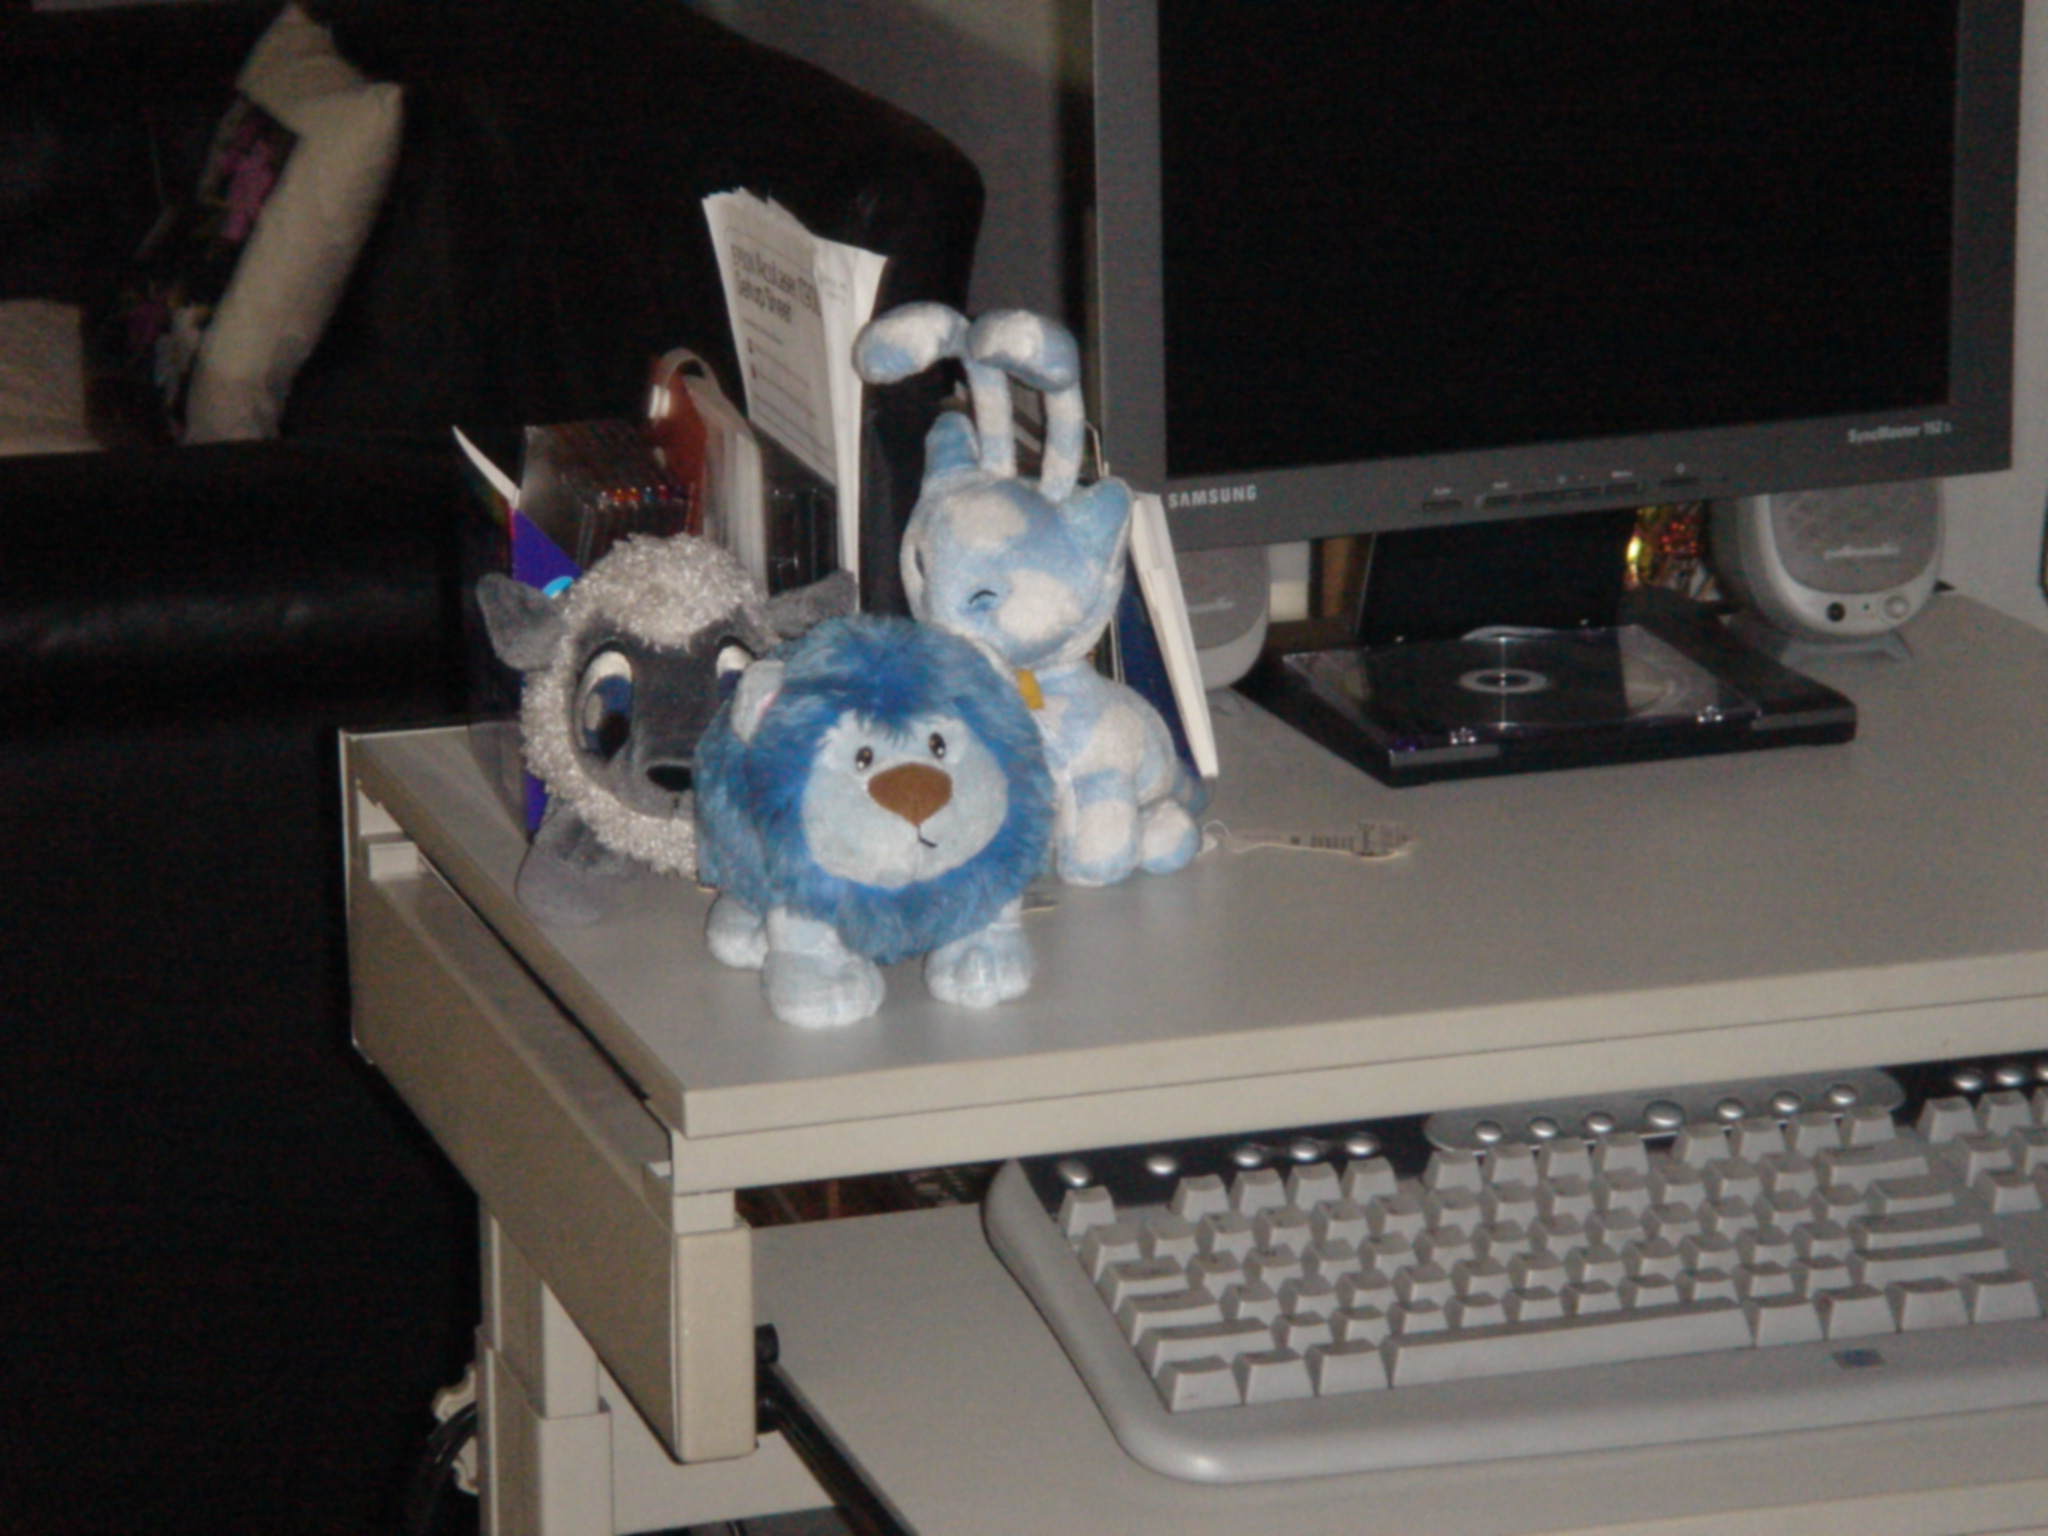 Three stuffed animal toys on a desk beside a computer keyboard and a monitor